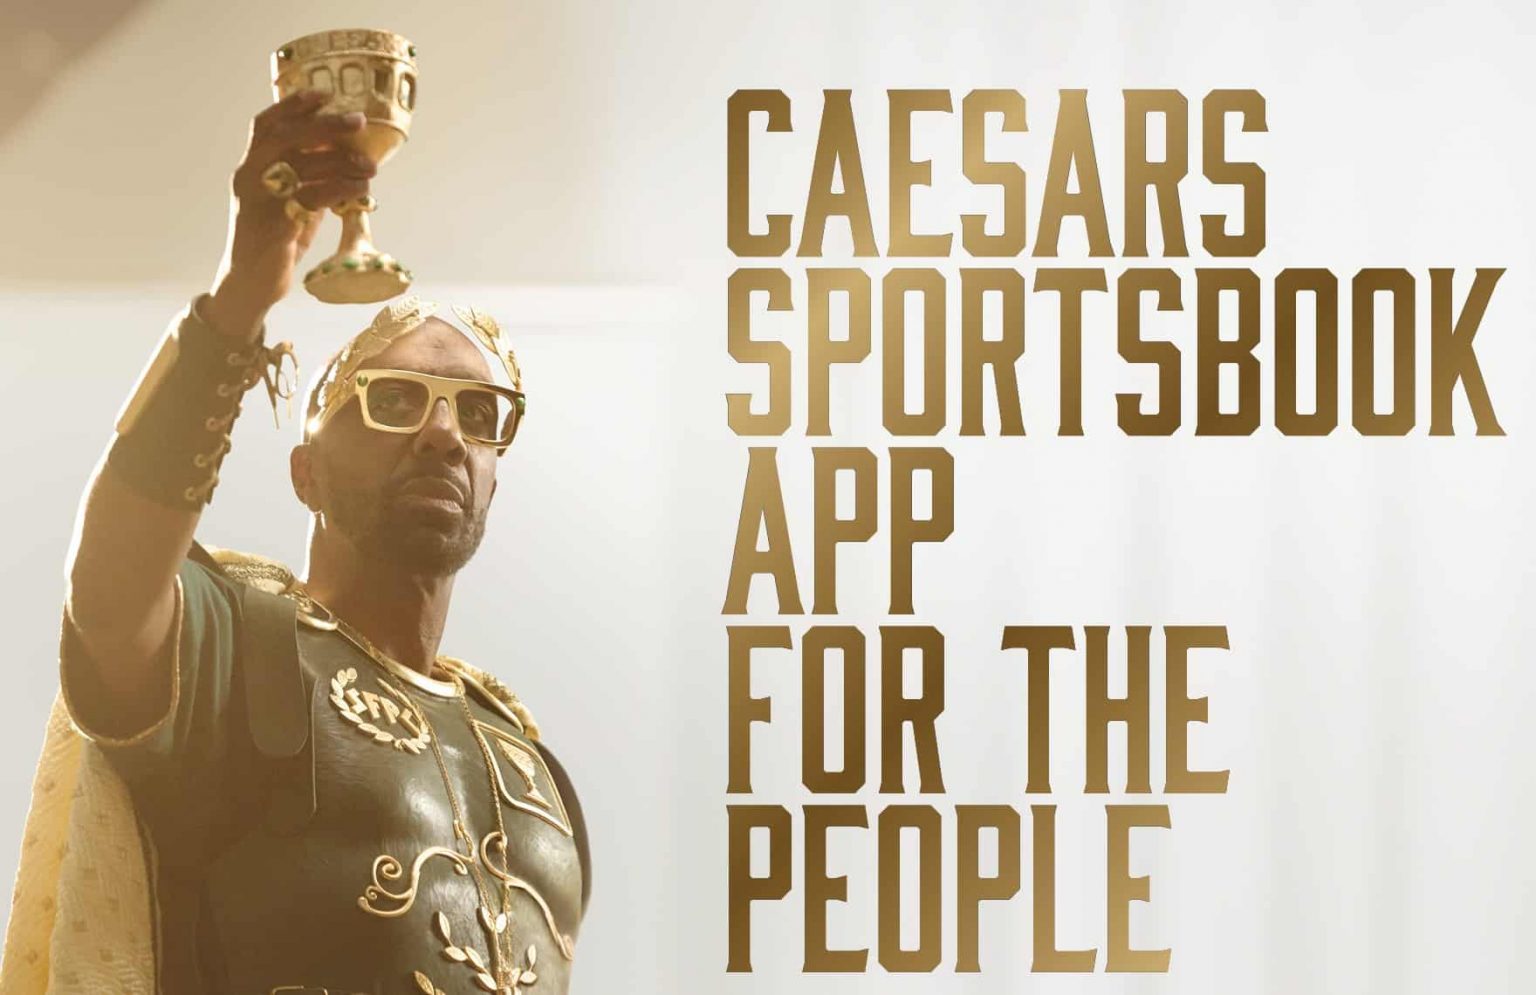 Caesars Casino download the last version for android